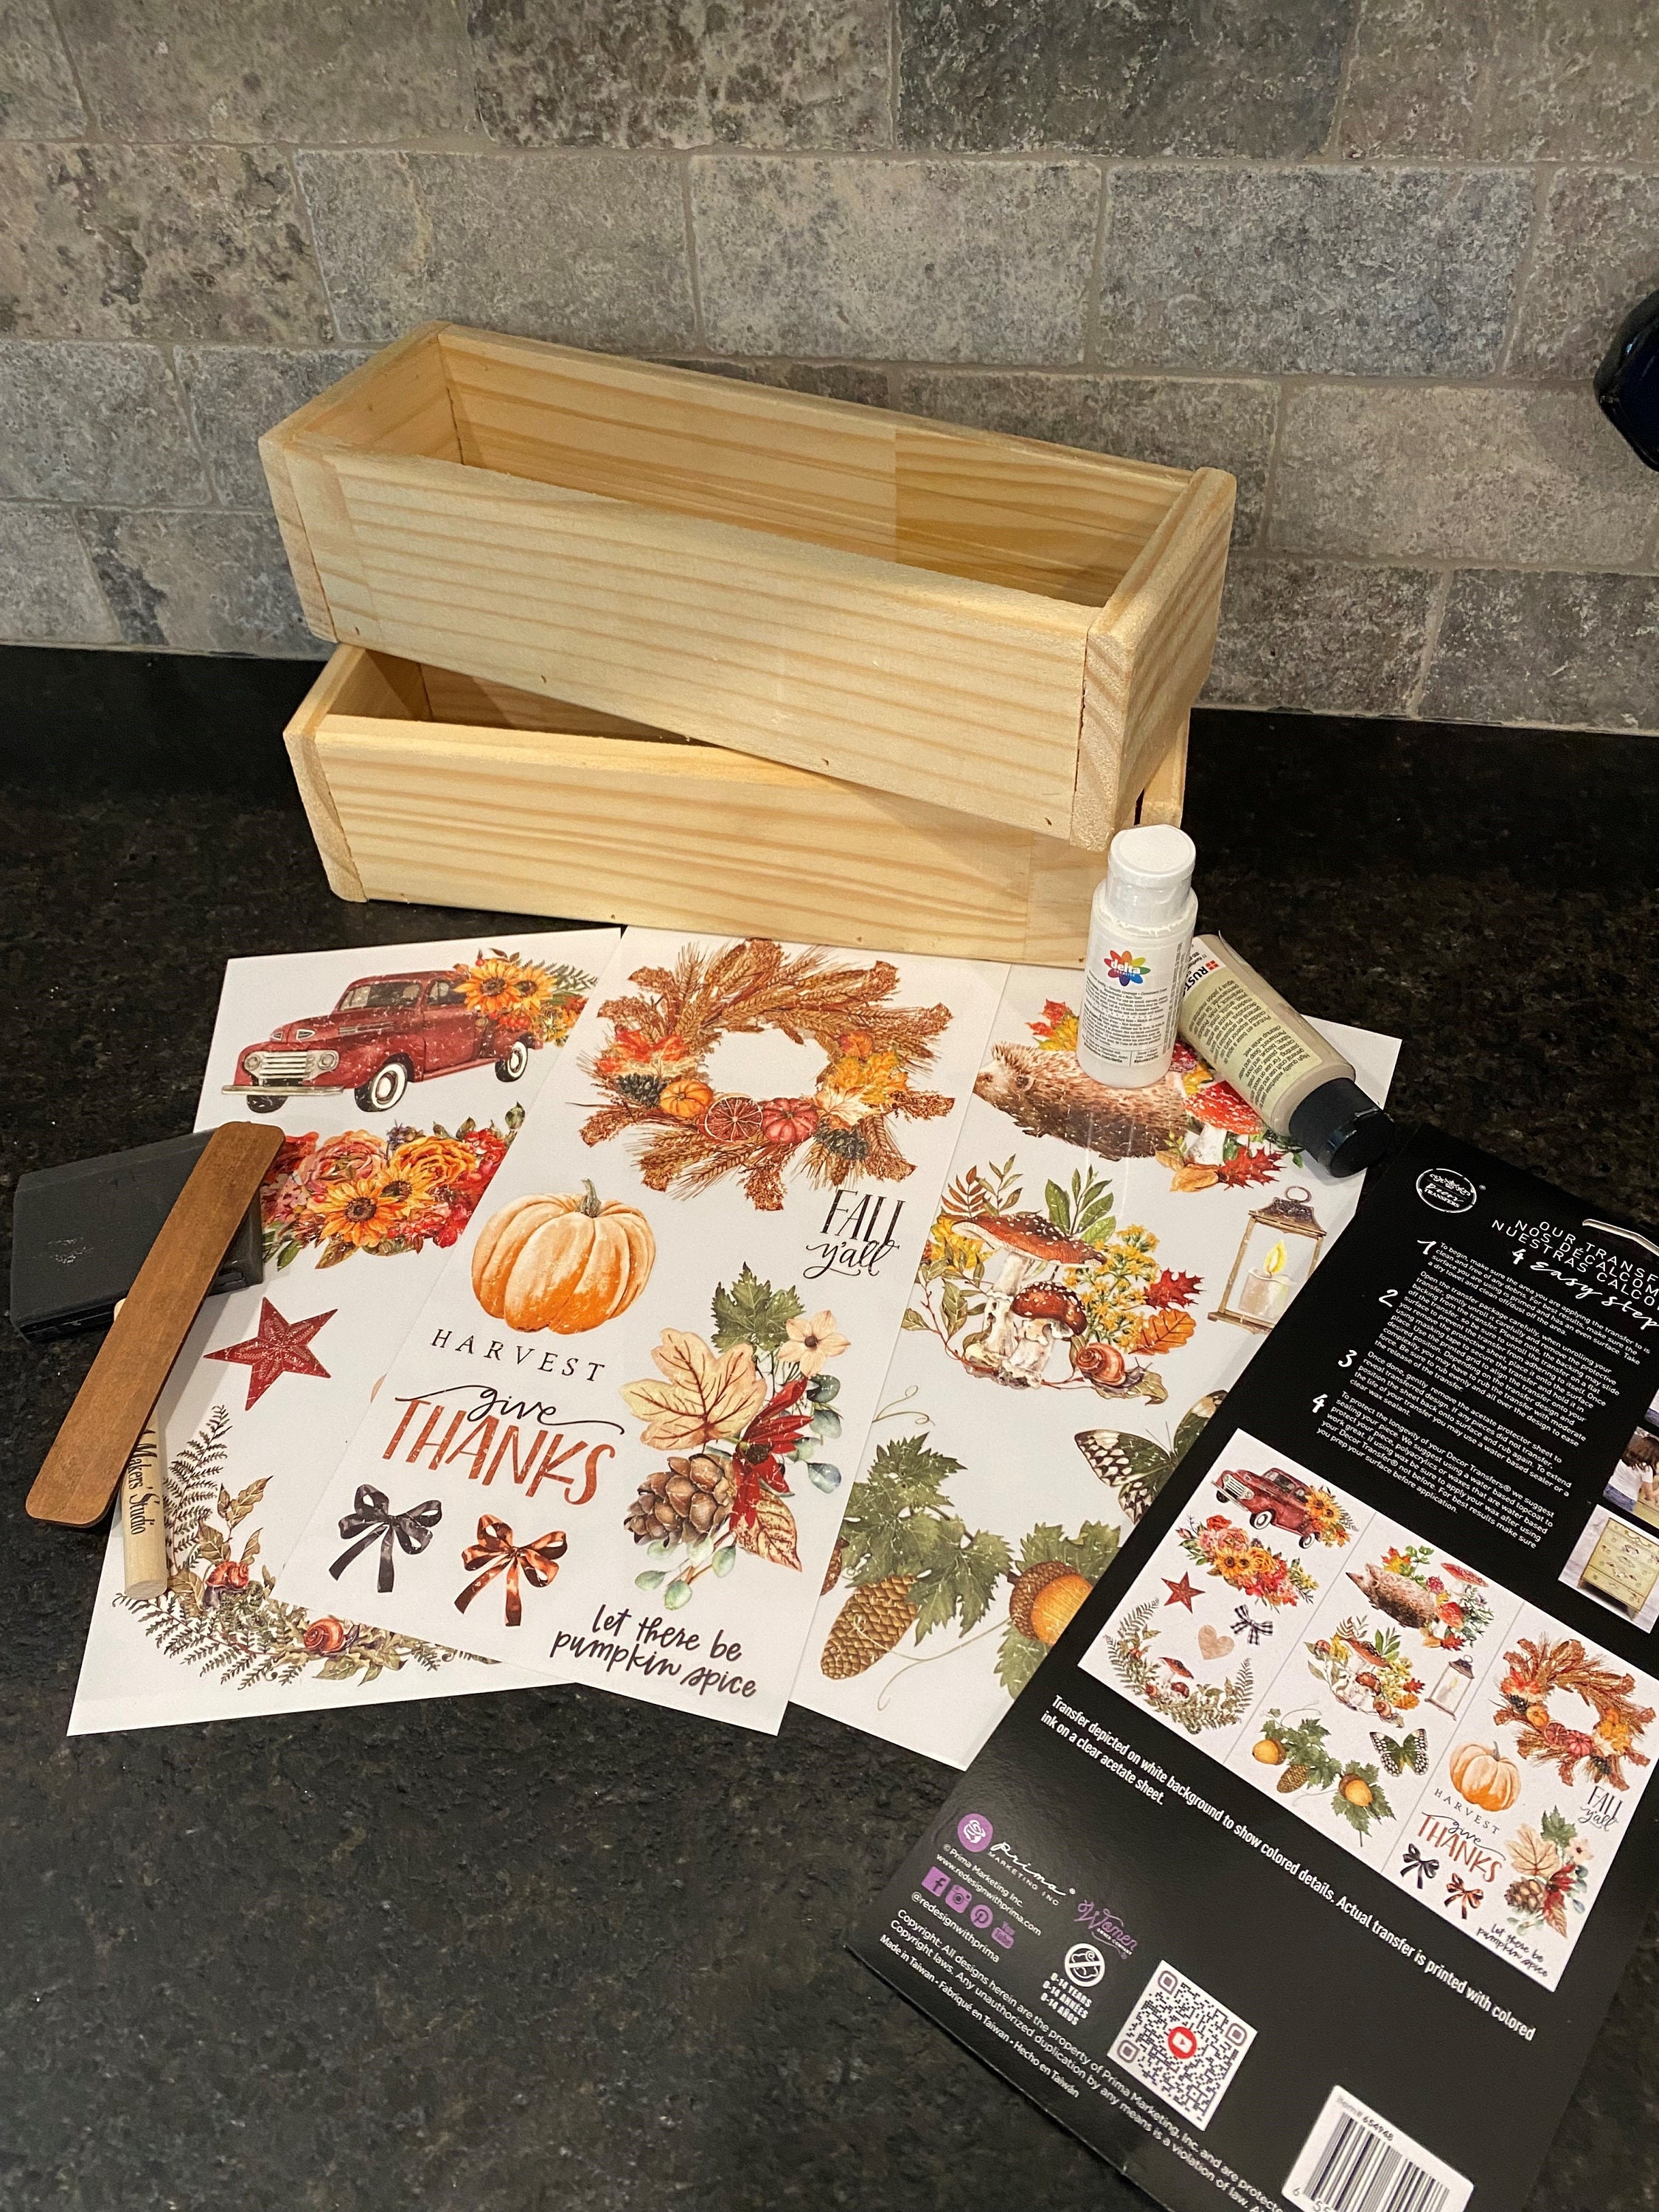 DIY Fall Gnome Painting Kit Make Your Own Wood Gnomes Craft Supply Kit DIY Wood  Craft Autumn Gnomes Harvest Decor Group Activity 